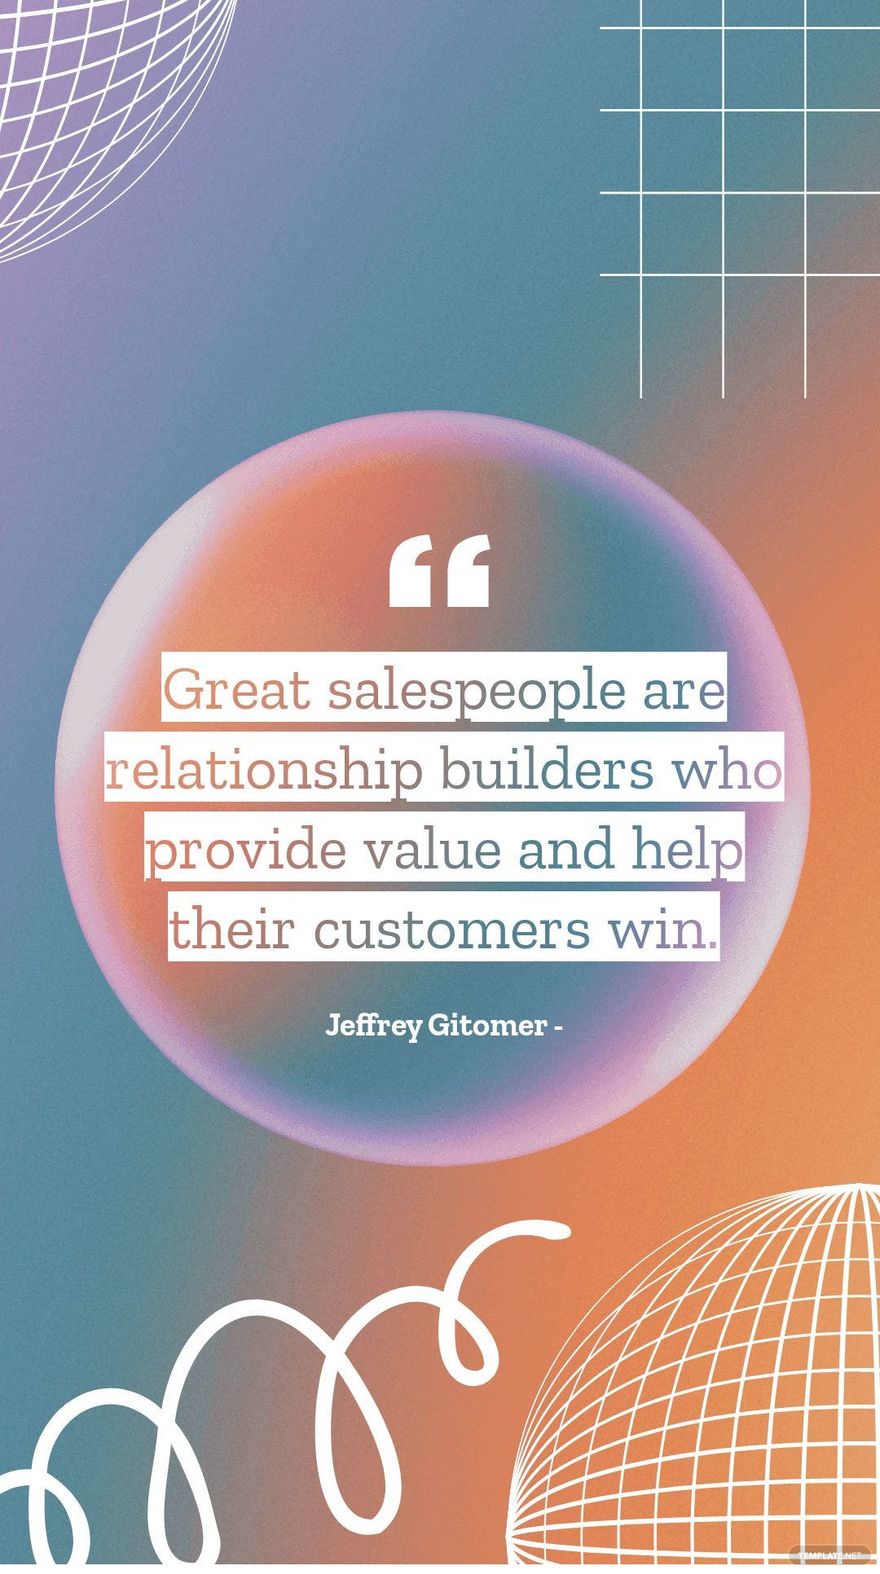 Jeffrey Gitomer - Great salespeople are relationship builders who provide value and help their customers win.